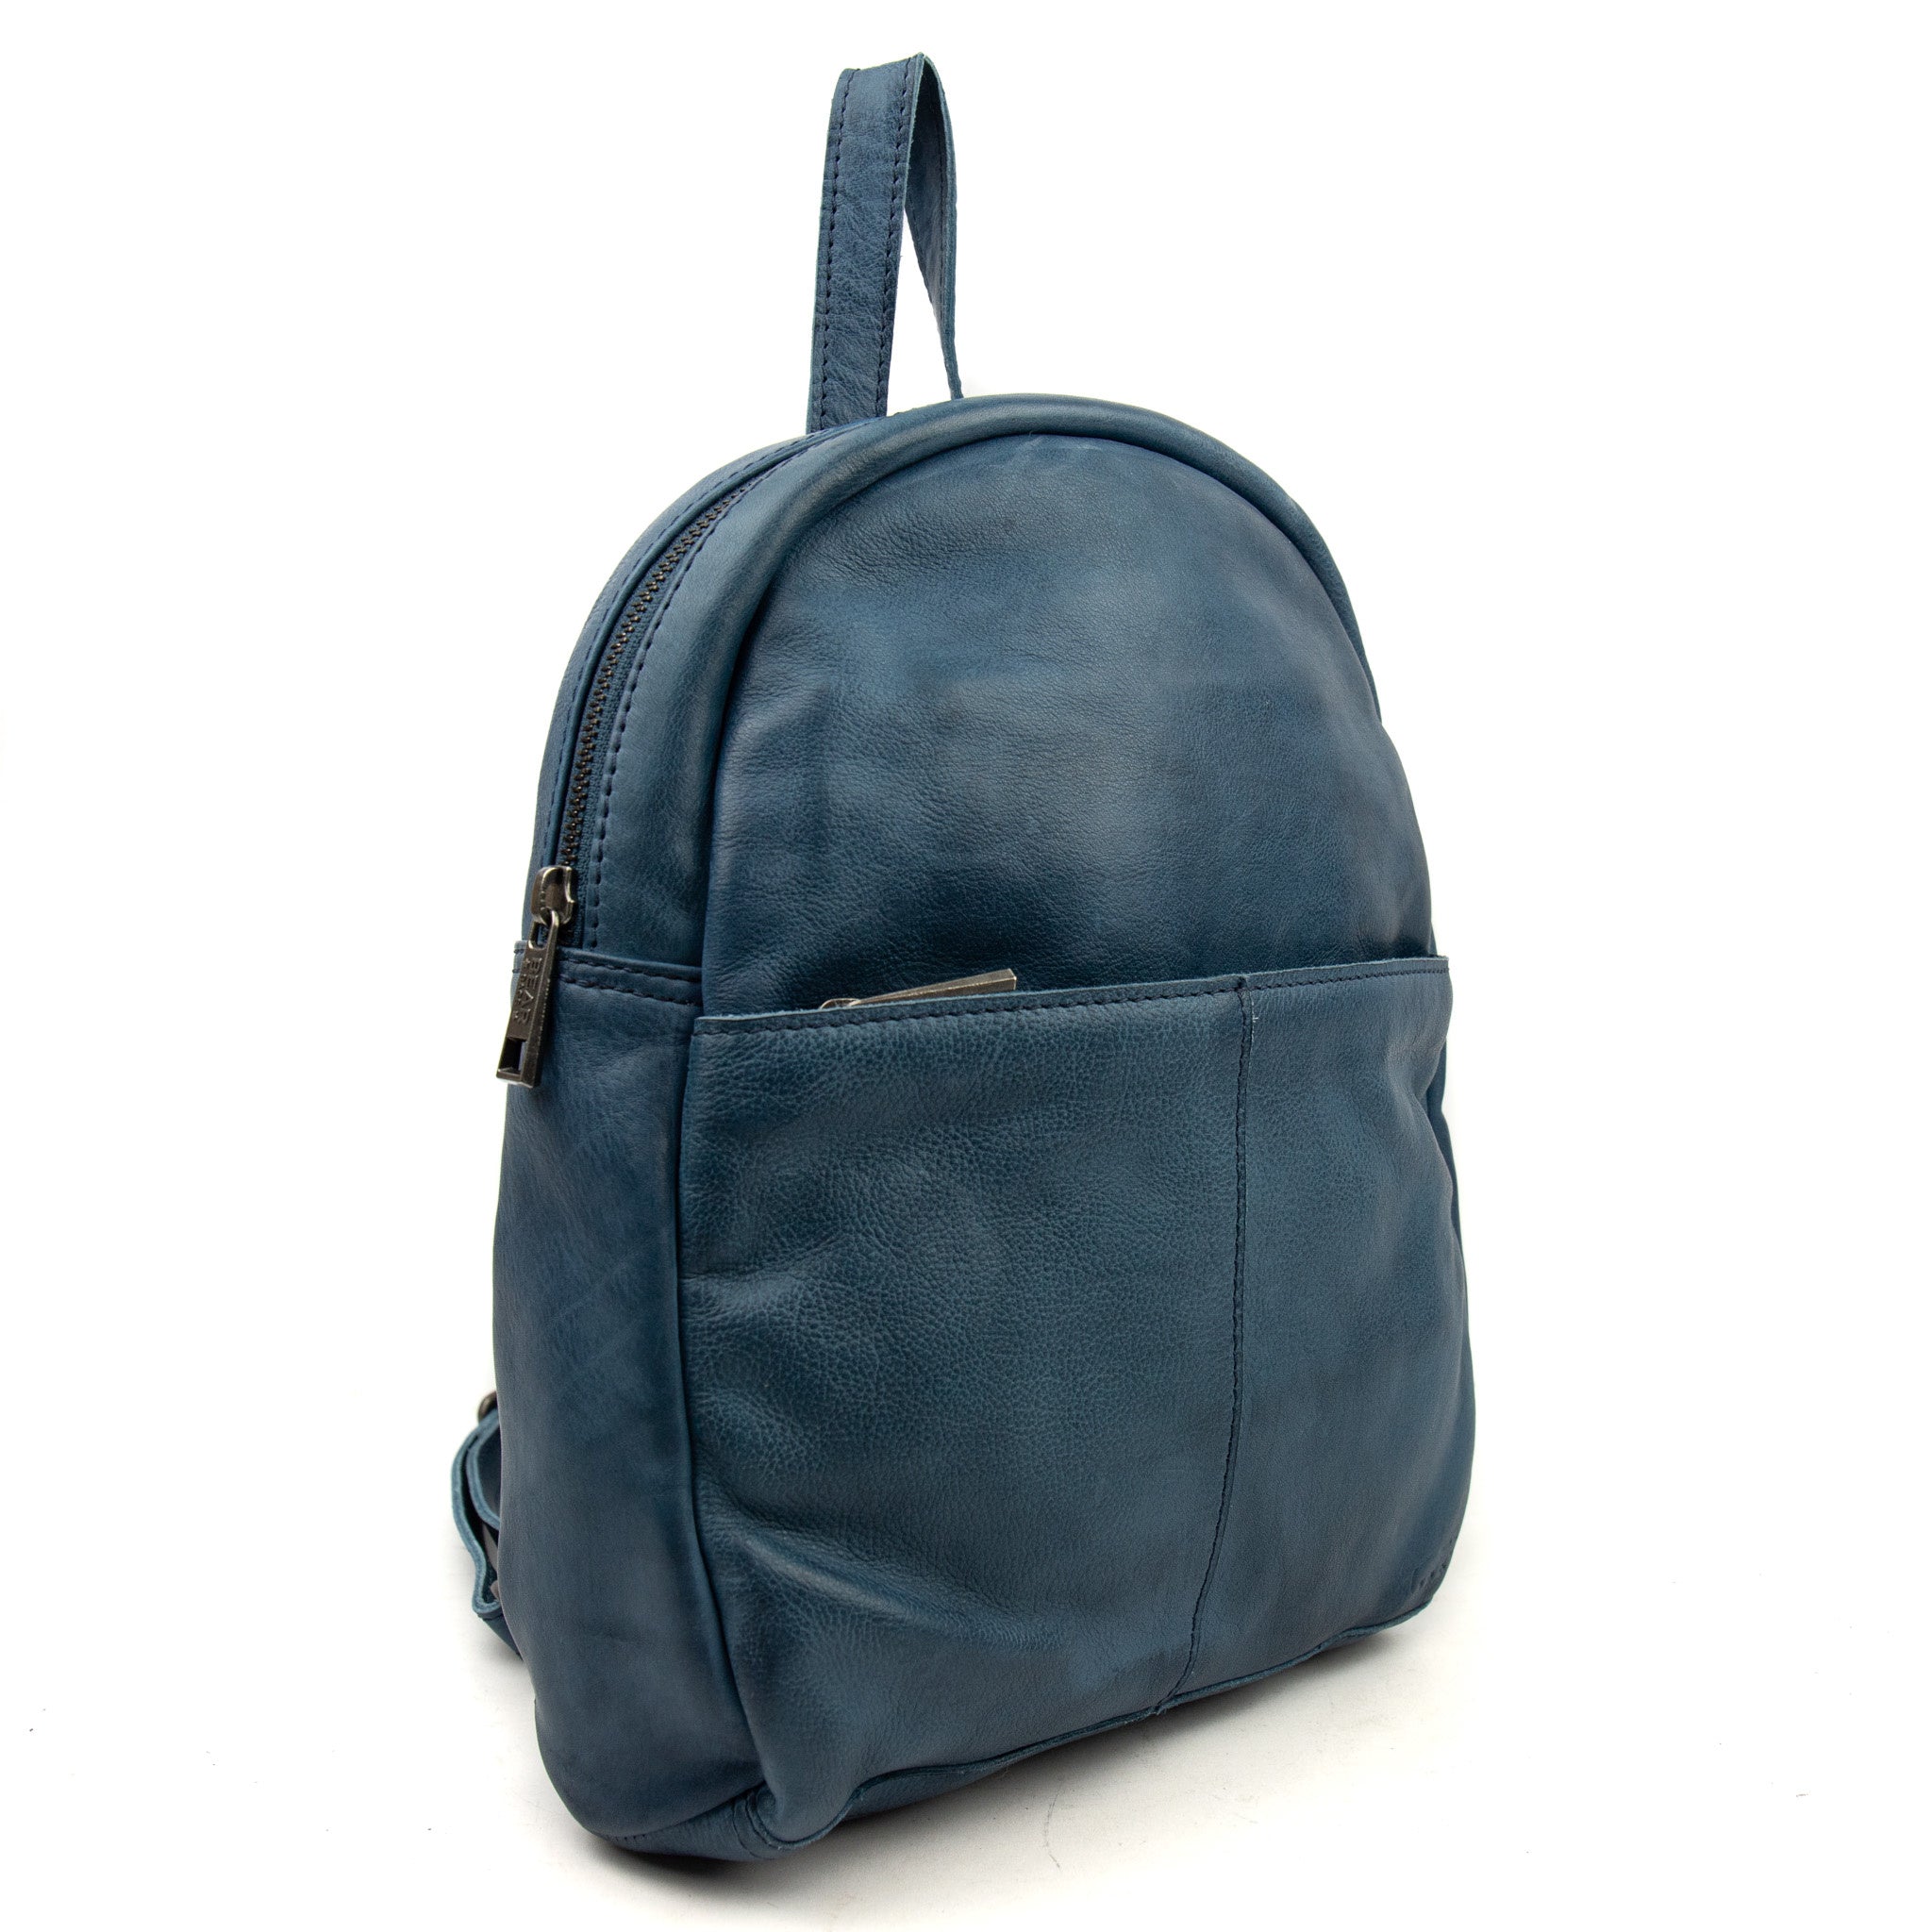 Backpack 'Lyra' turquoise - CP 2186